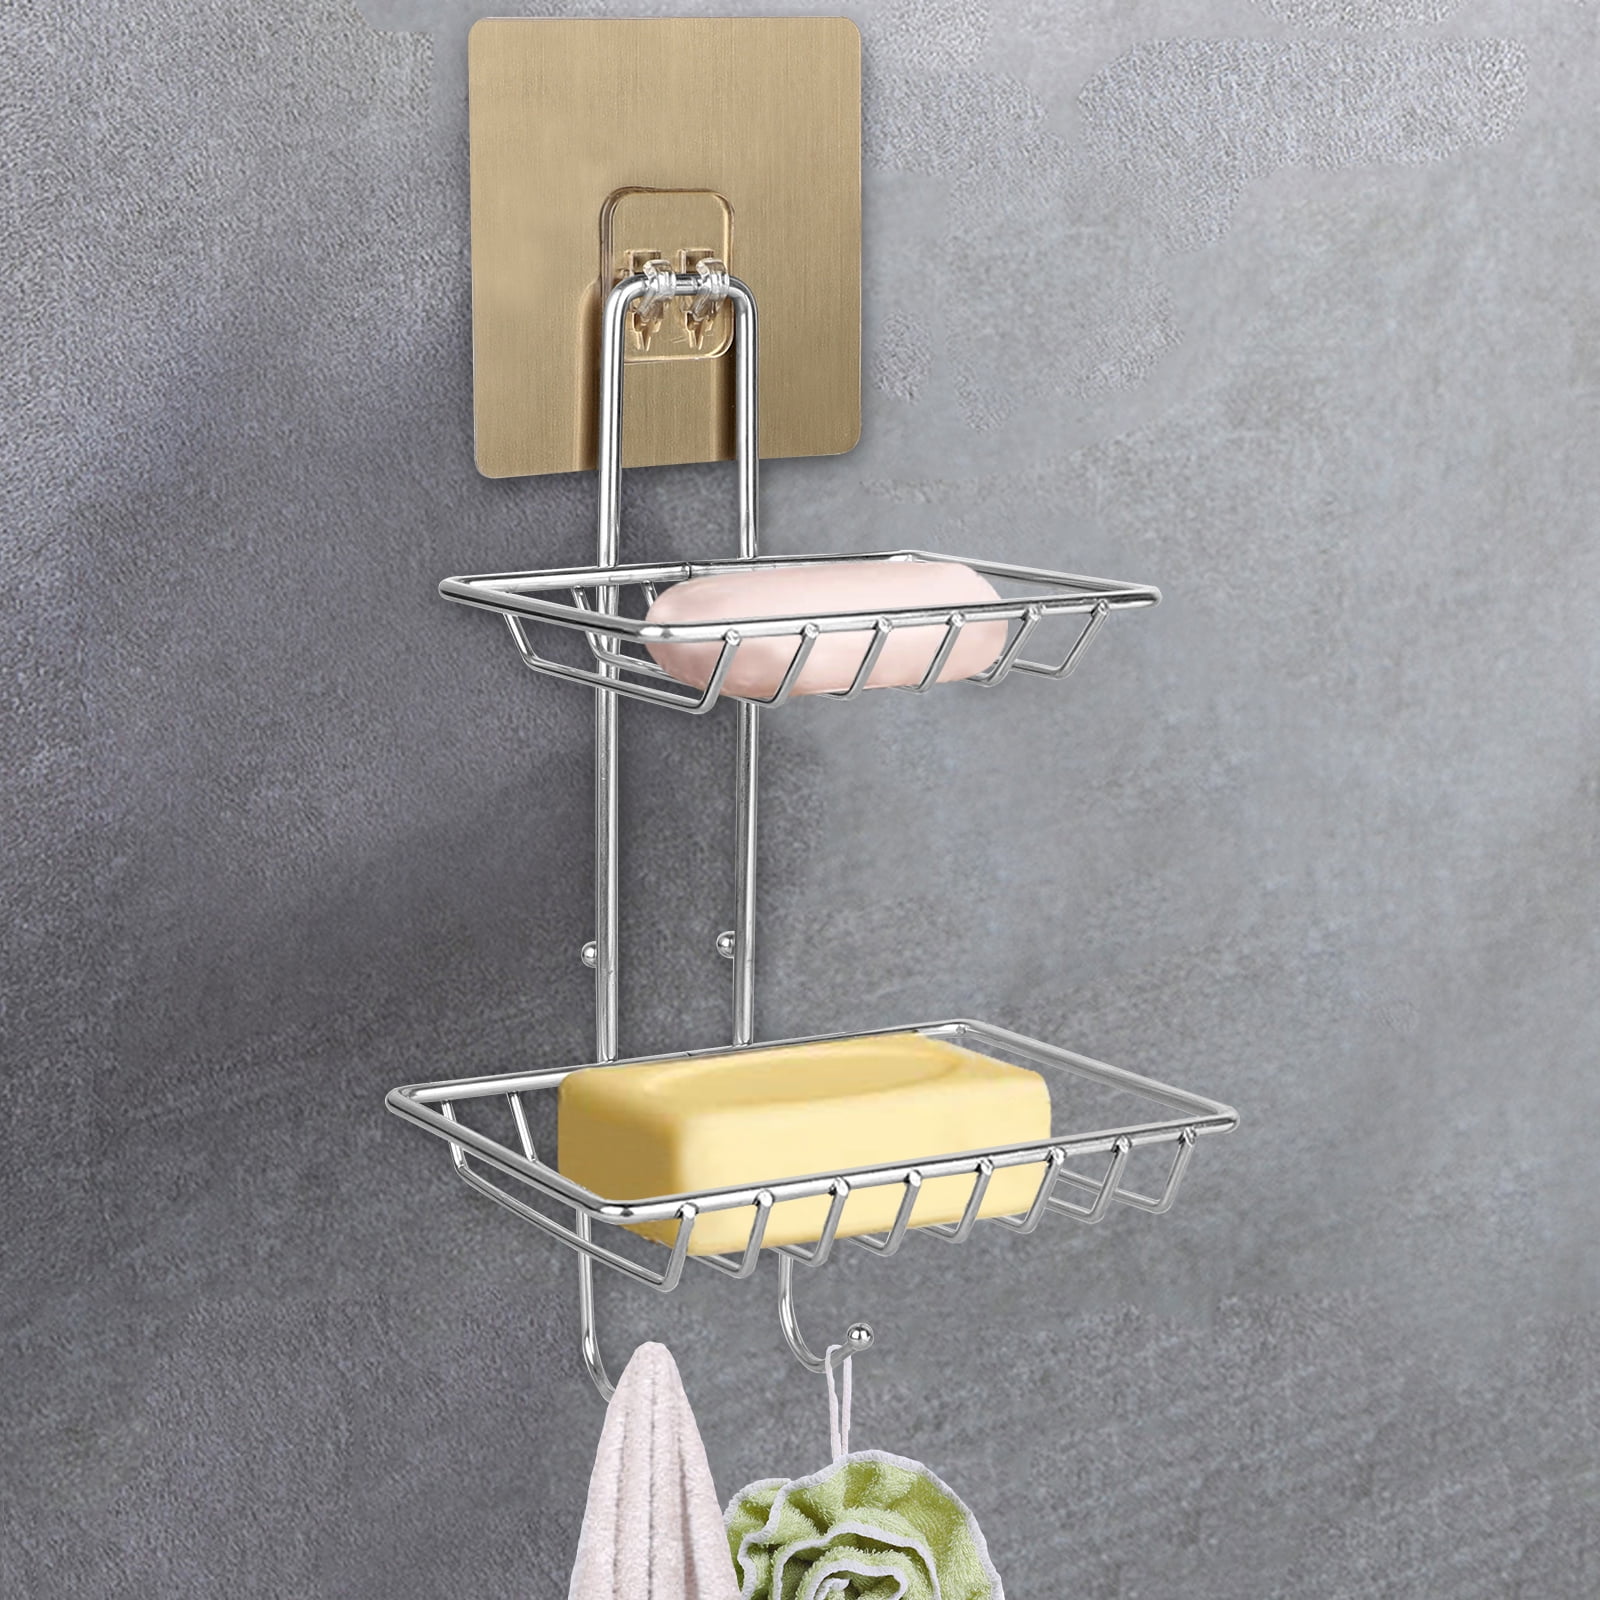 Plastic Suction Cup Stainless Steel Bathroom Shower Soap Holder Dish Rack 